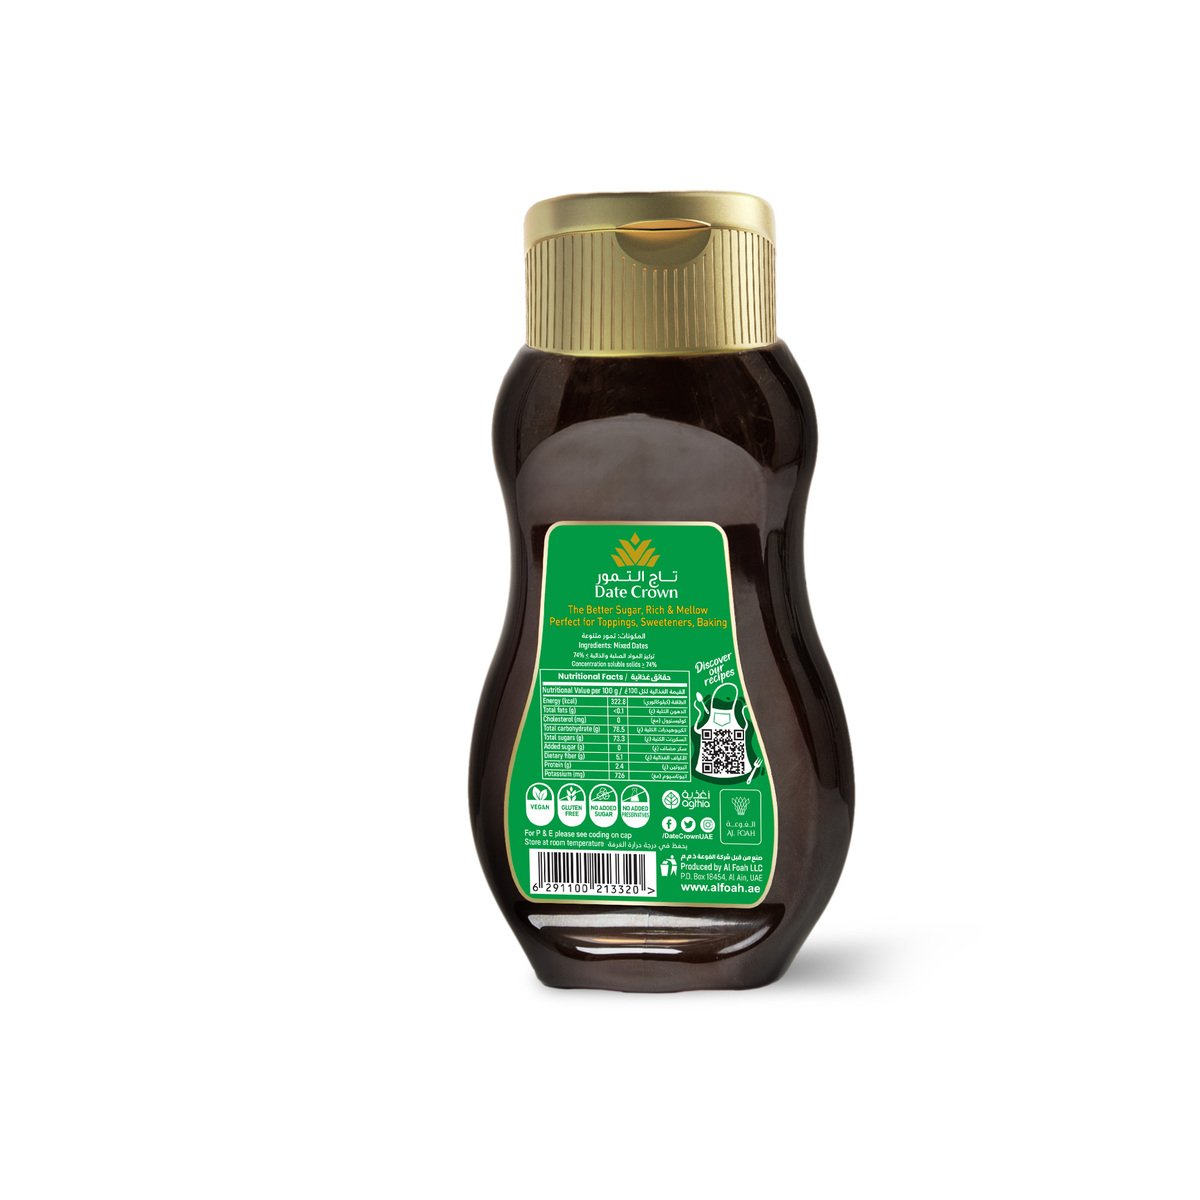 Date Crown Syrup 400 g